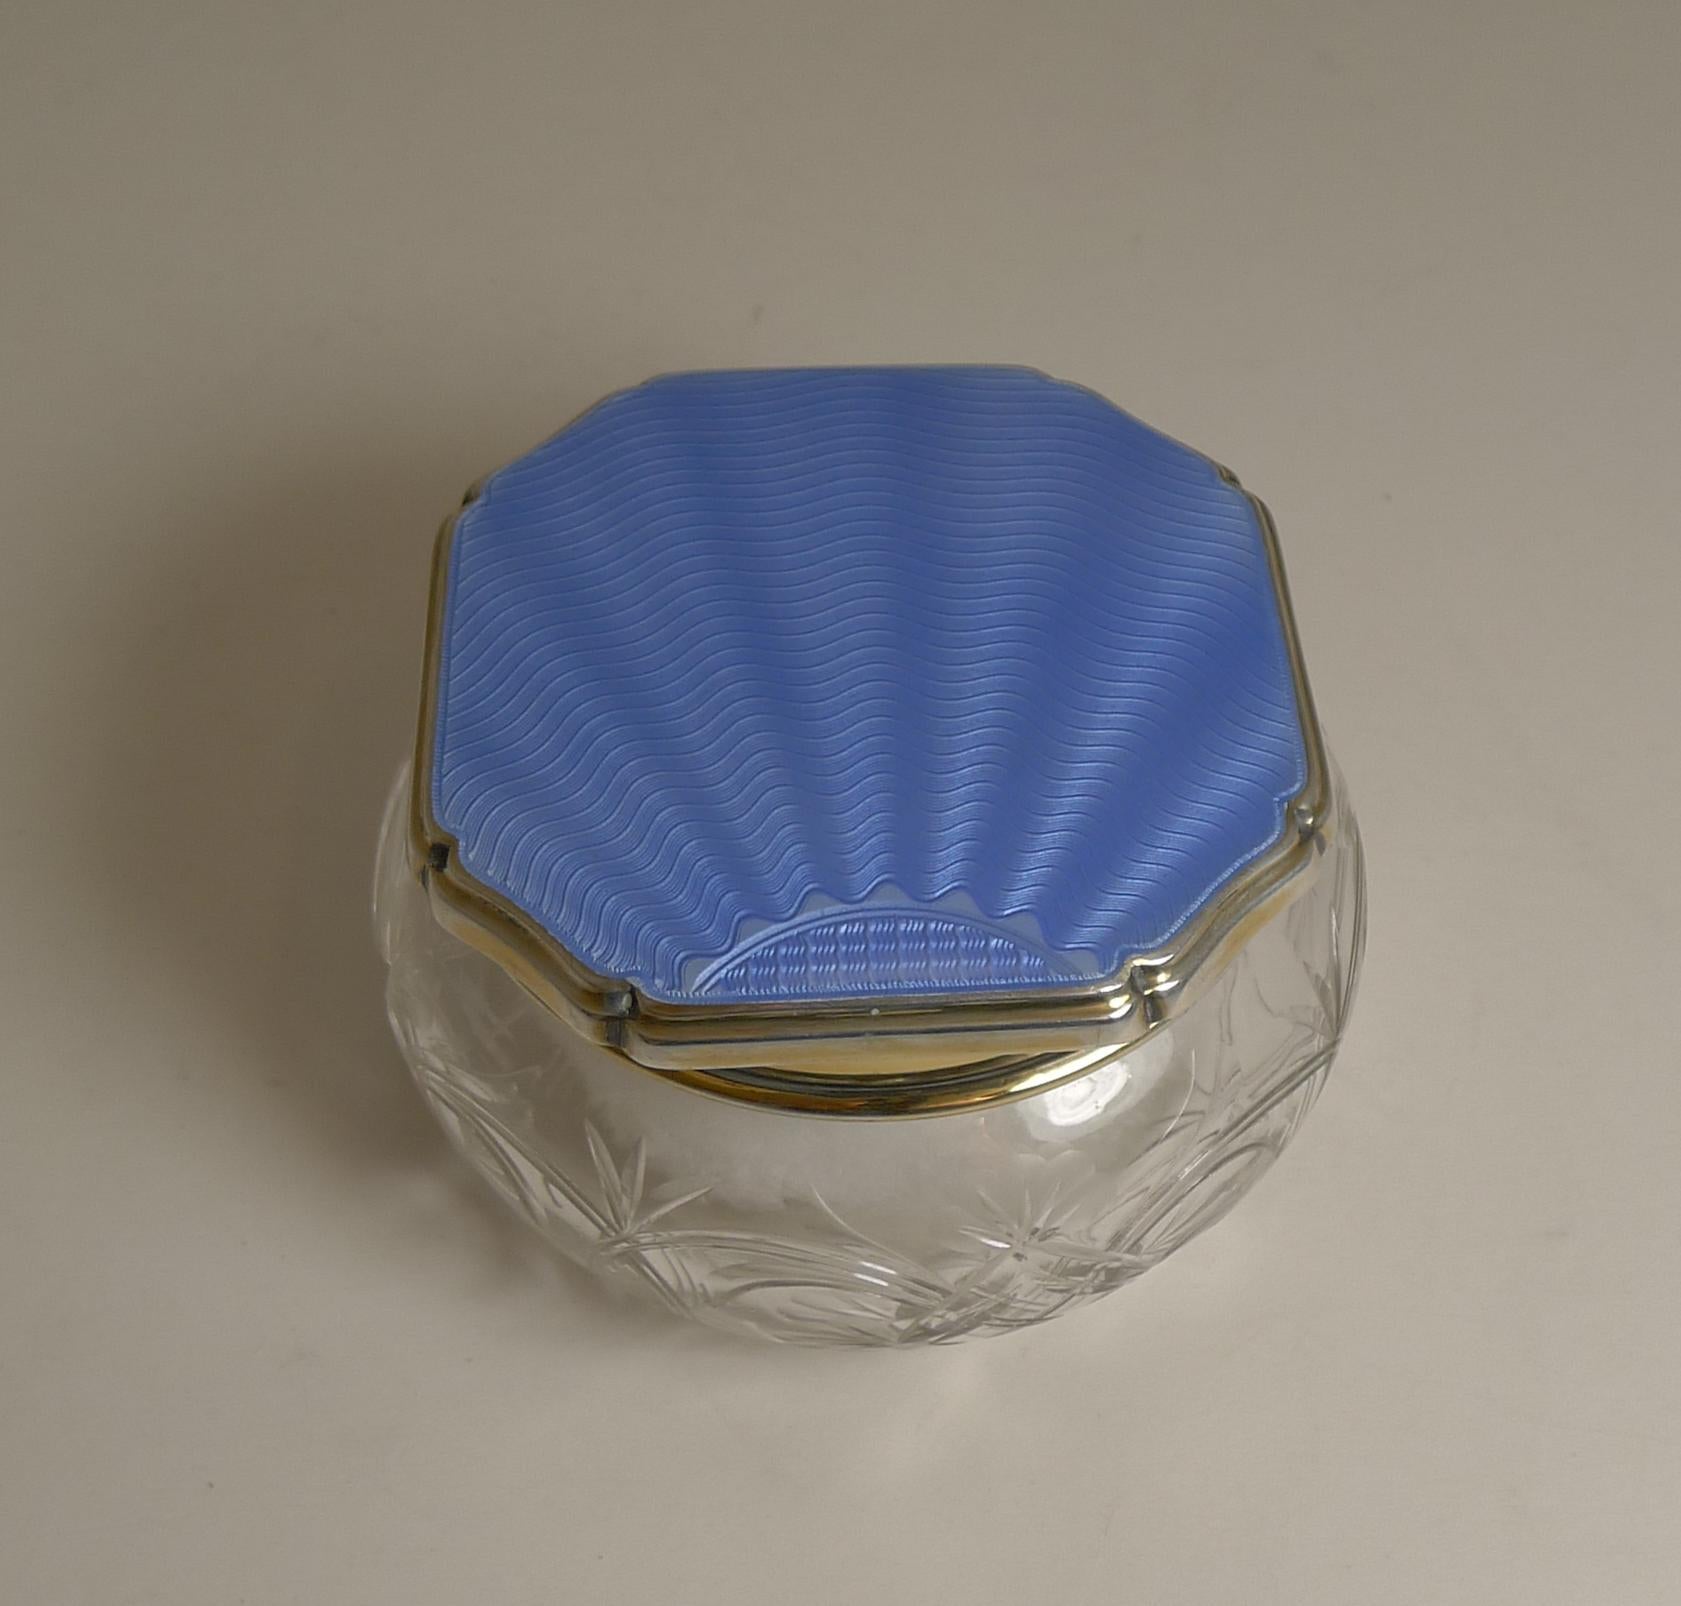 An exquisite Art Deco powder bowl by one of the finest quality English silversmith's, Walker and Hall of Sheffield.

The base is made from fine quality crystal with beautiful hand-cutting and a star cut underside.

The lid is made form